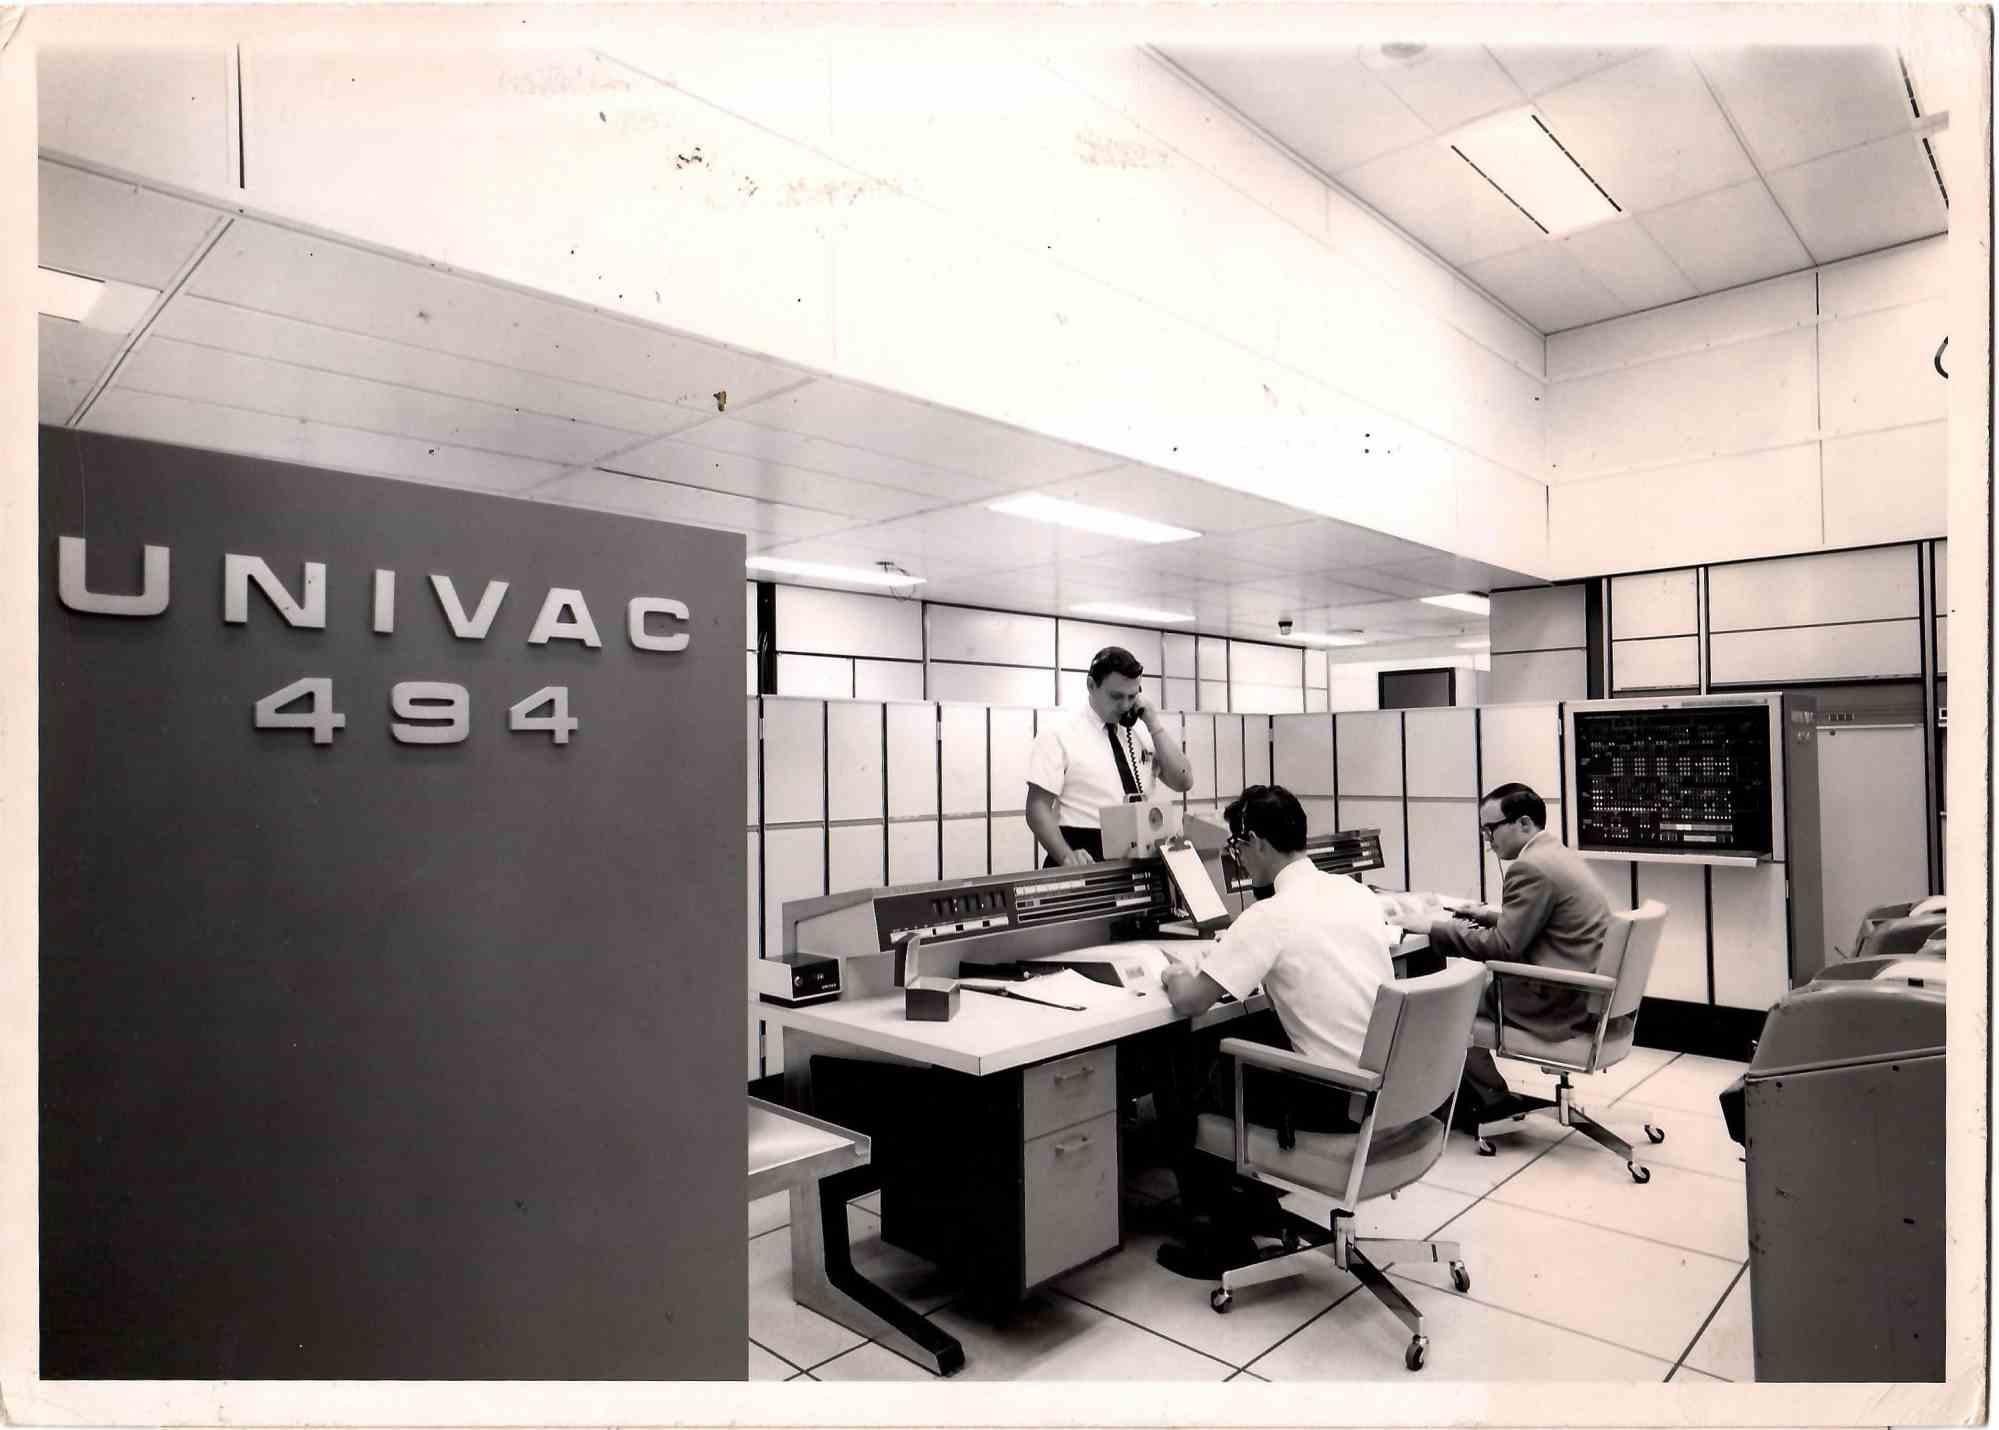 Unknown Figurative Photograph - Men on the moon, UNIVAC 494 - Vintage Photograph - Early 1970's